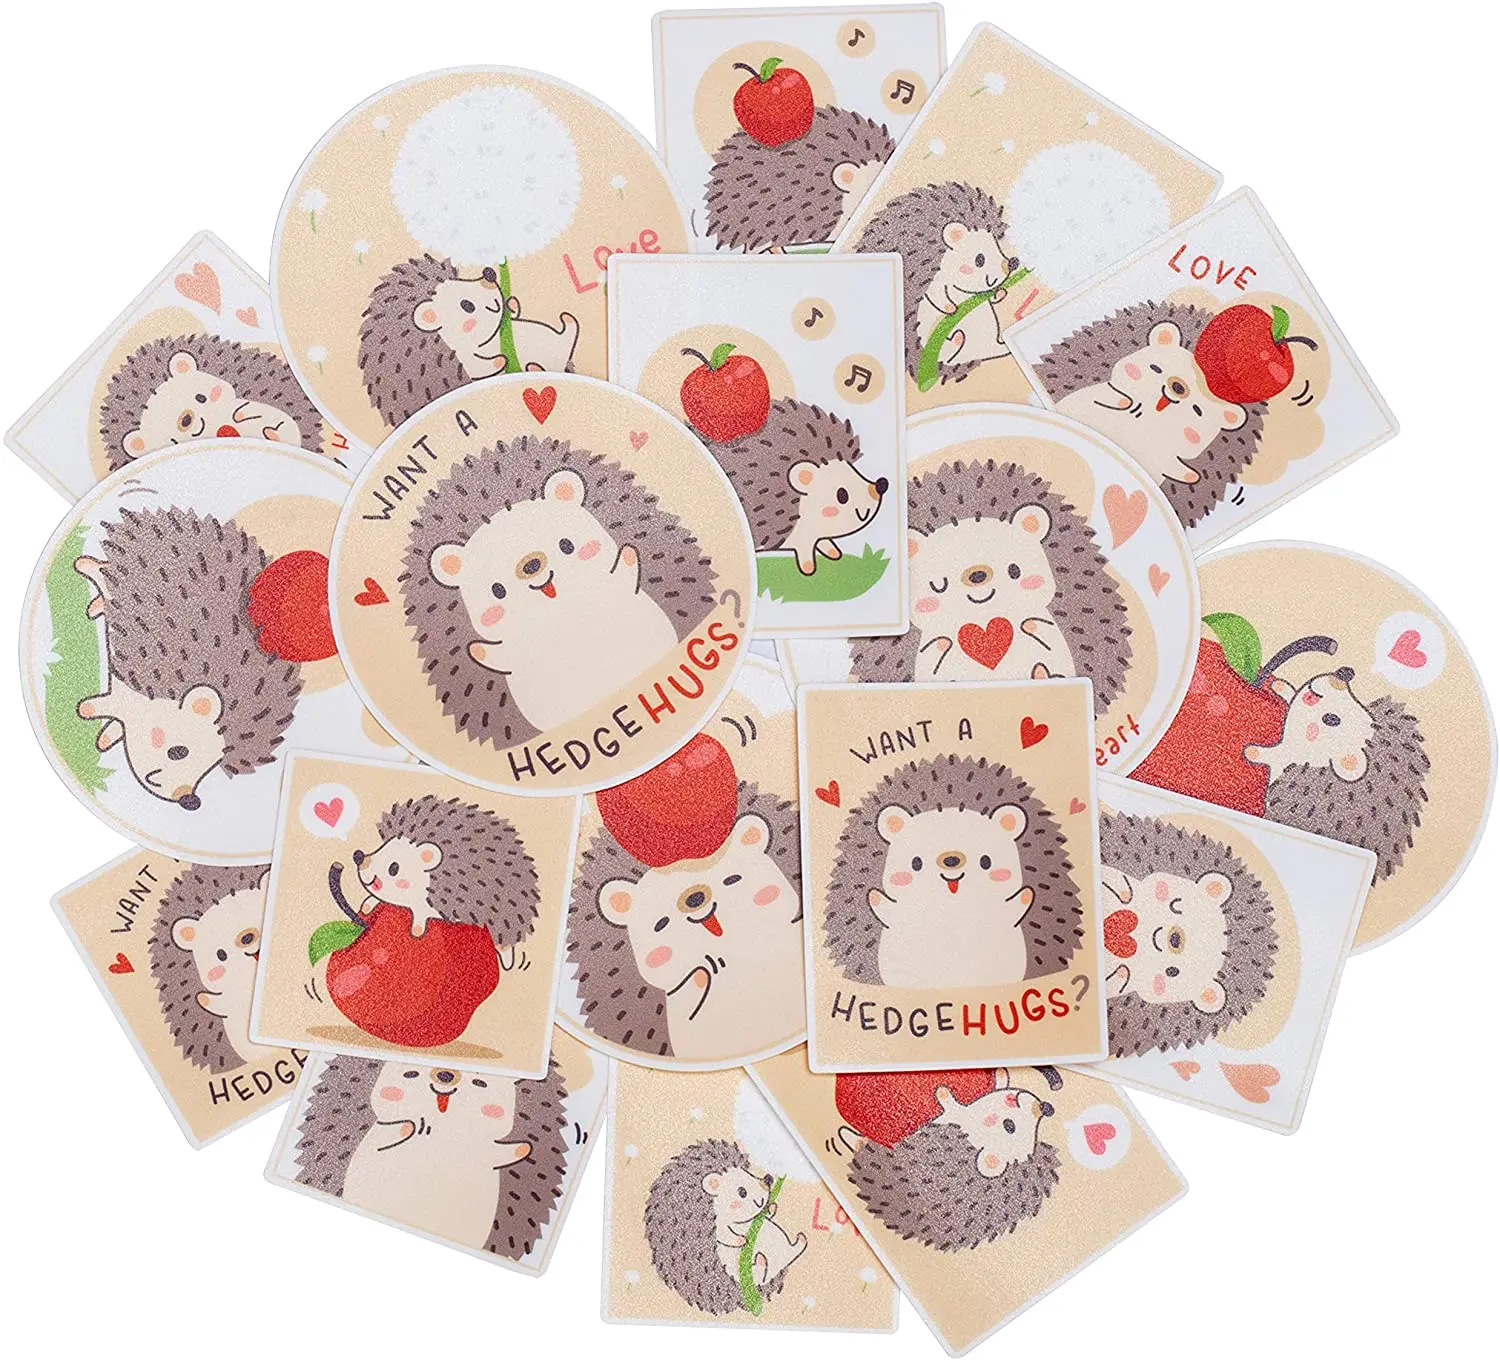 18pcs Cute Hedgehog Sticker Pack Animal Themed Square, Vertical and Round Stickers Decals for Journals